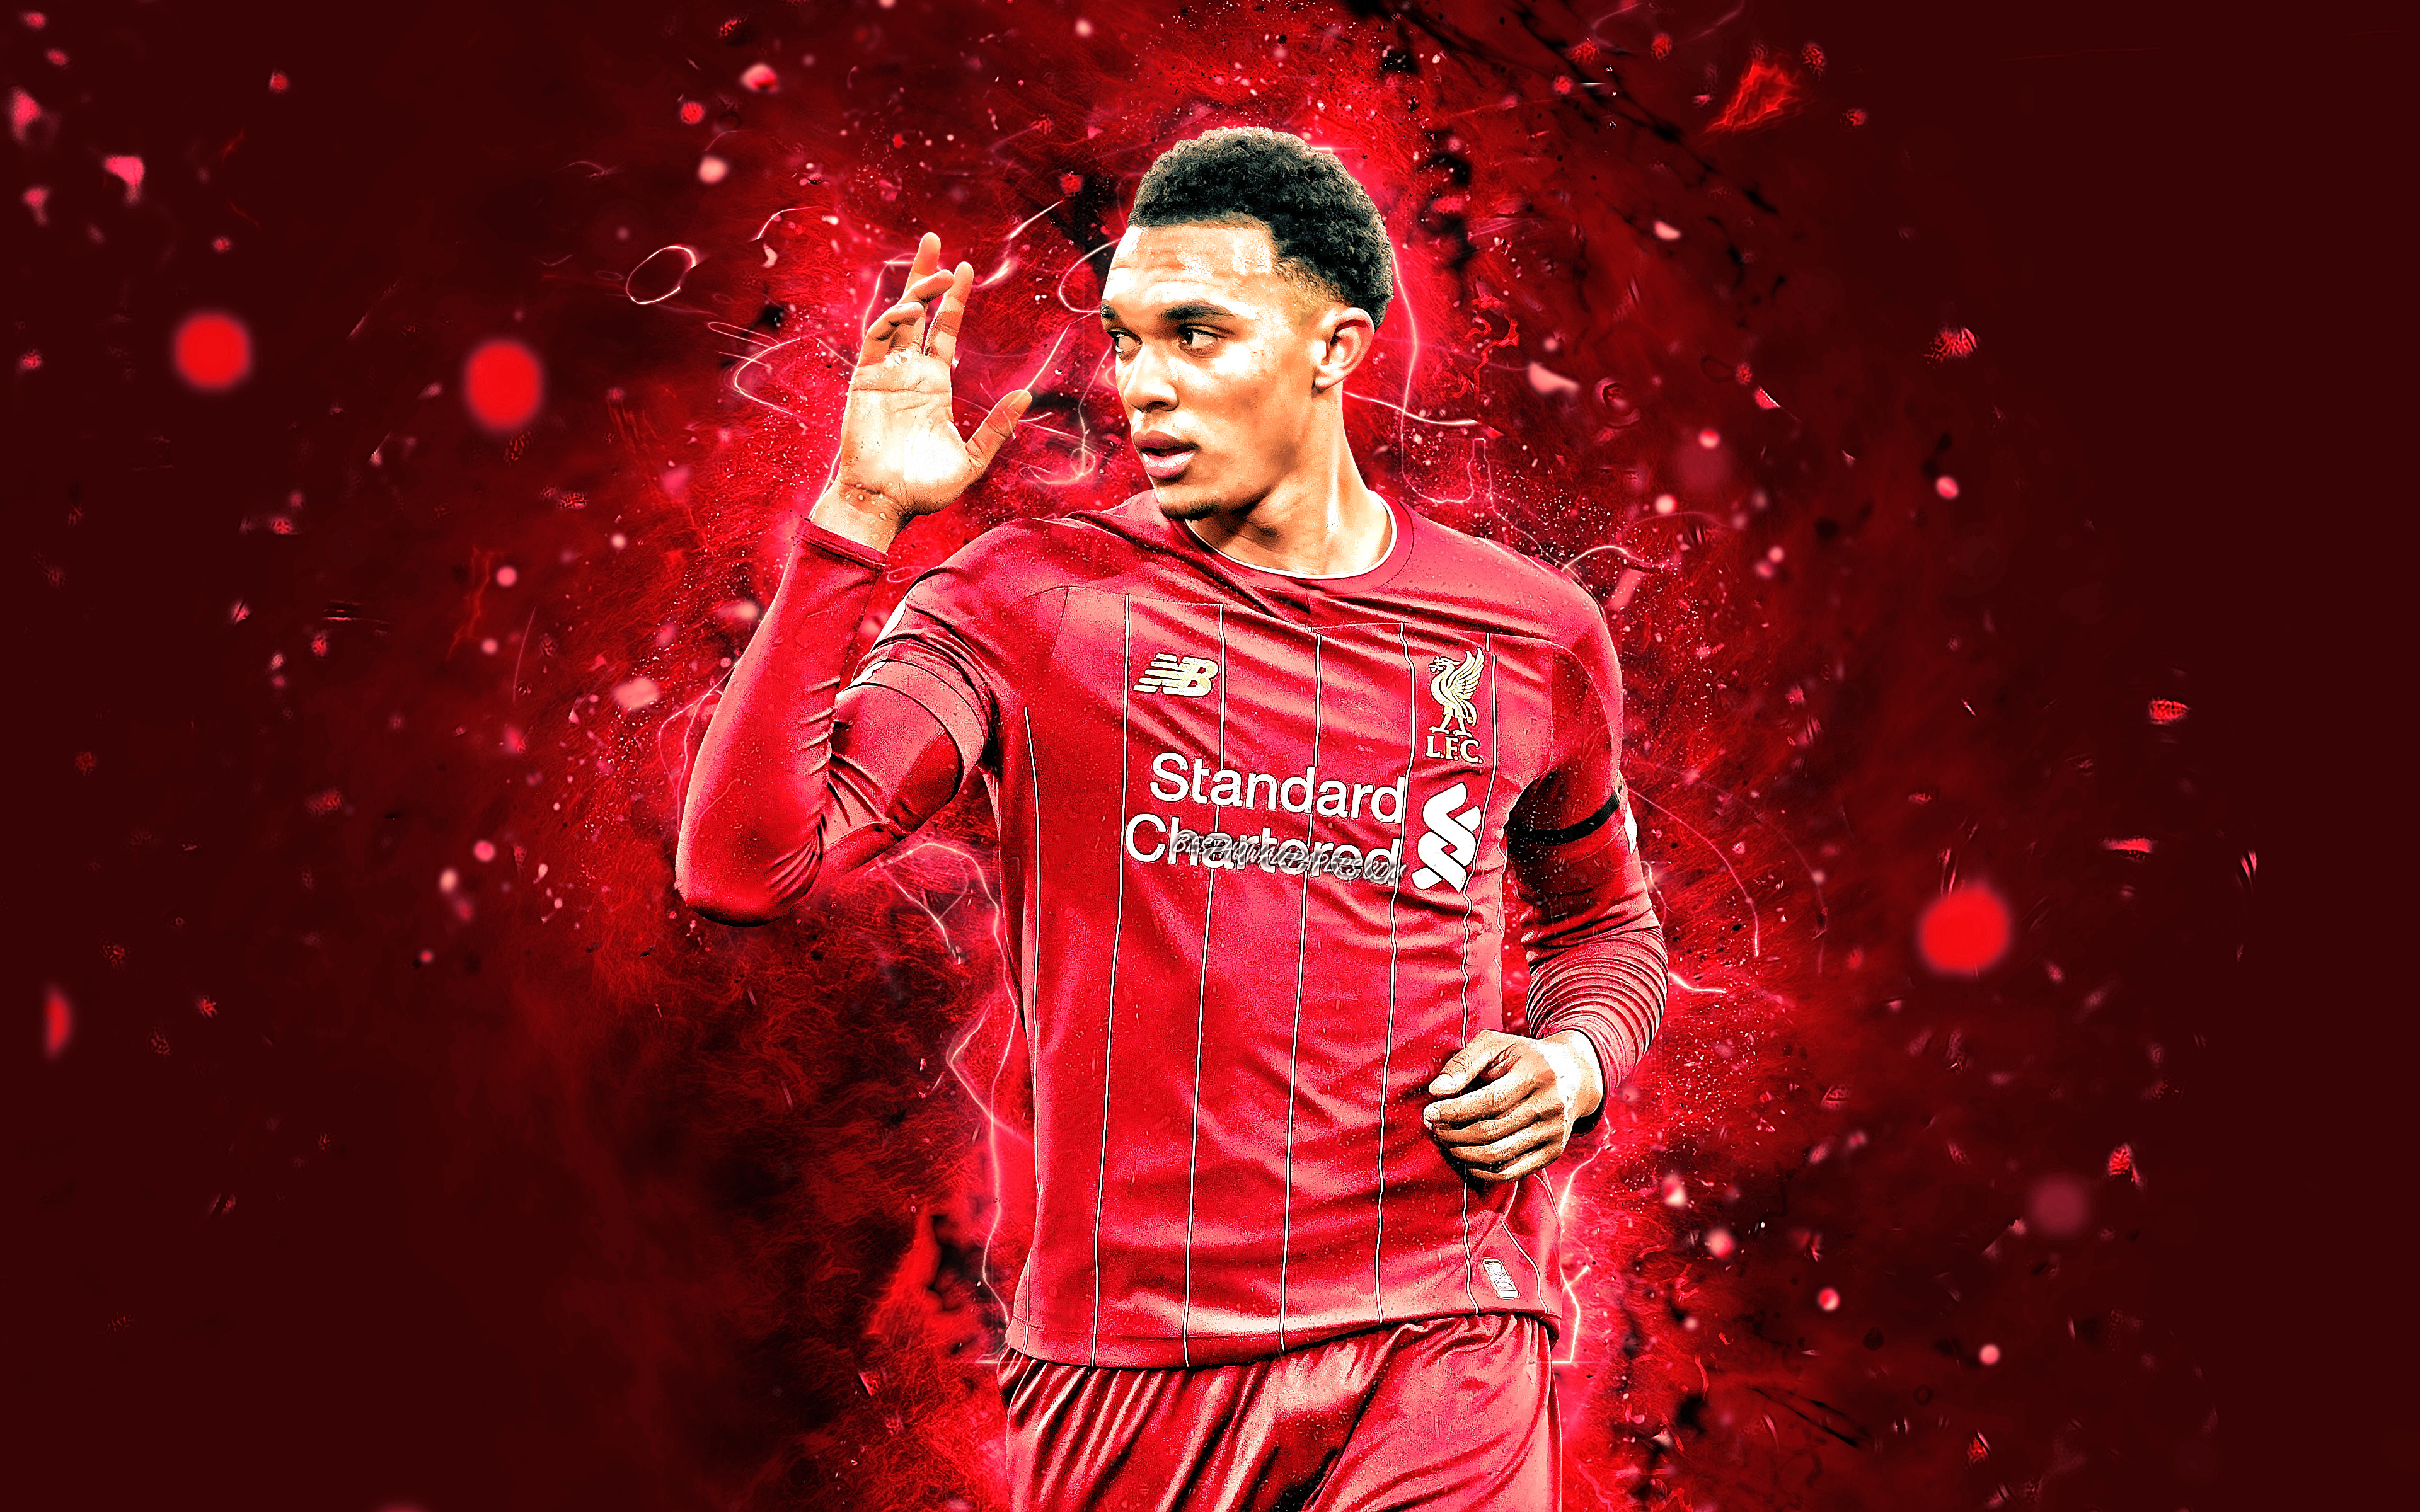 Download Wallpaper Trent Alexander Arnold, 4k, Goal, English Footballers, Liverpool FC, Neon Lights, Trent John Alexander Arnold, Soccer, LFC, Defender, Premier League, Football, Liverpool For Desktop With Resolution 3840x2400. High Quality HD